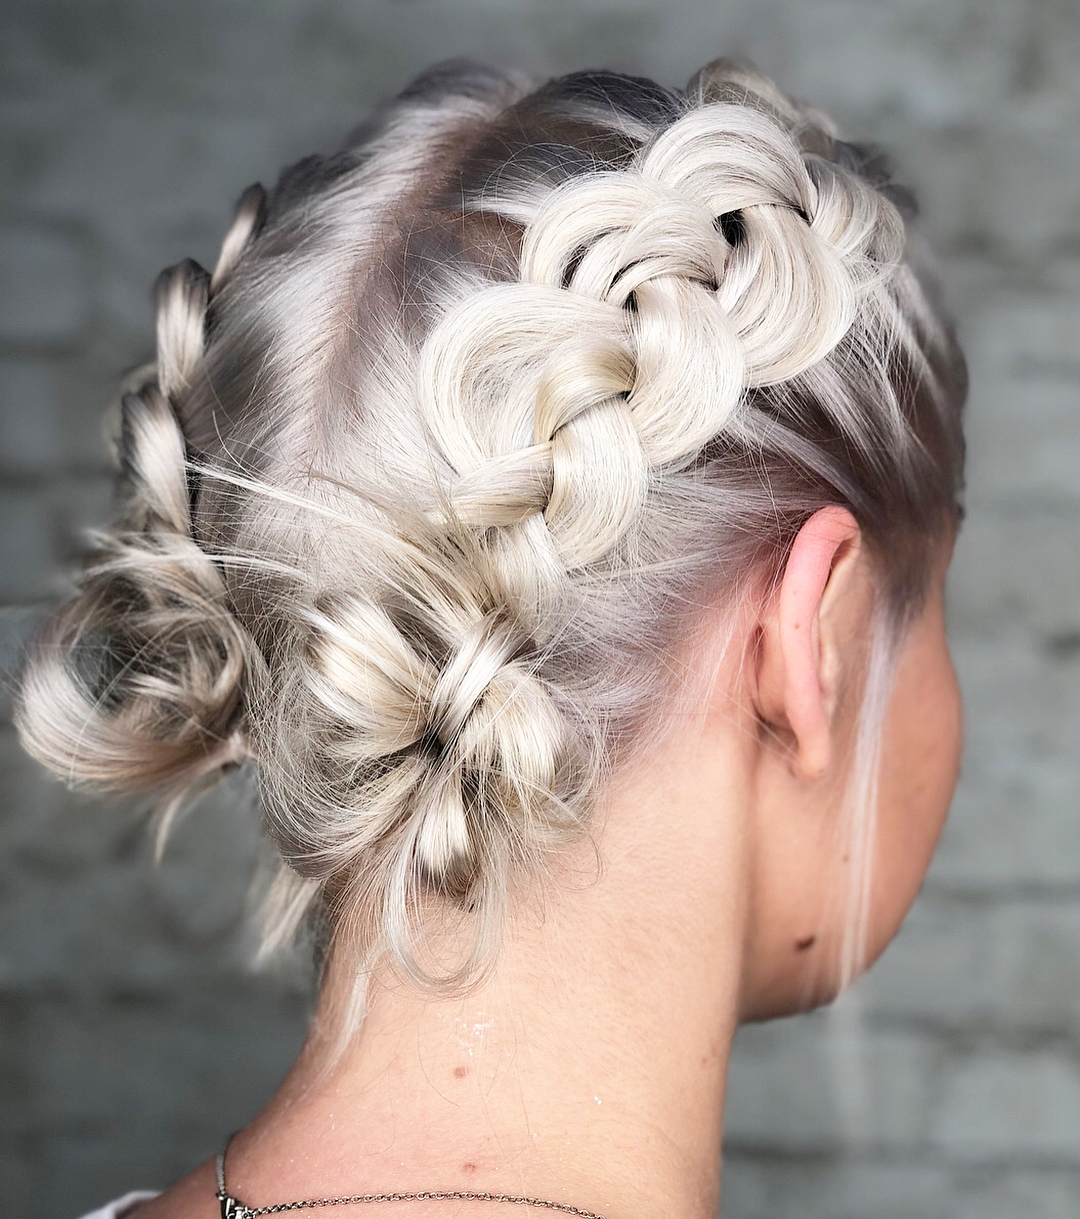 44 Incredibly Chic Updo Ideas for Short Hair